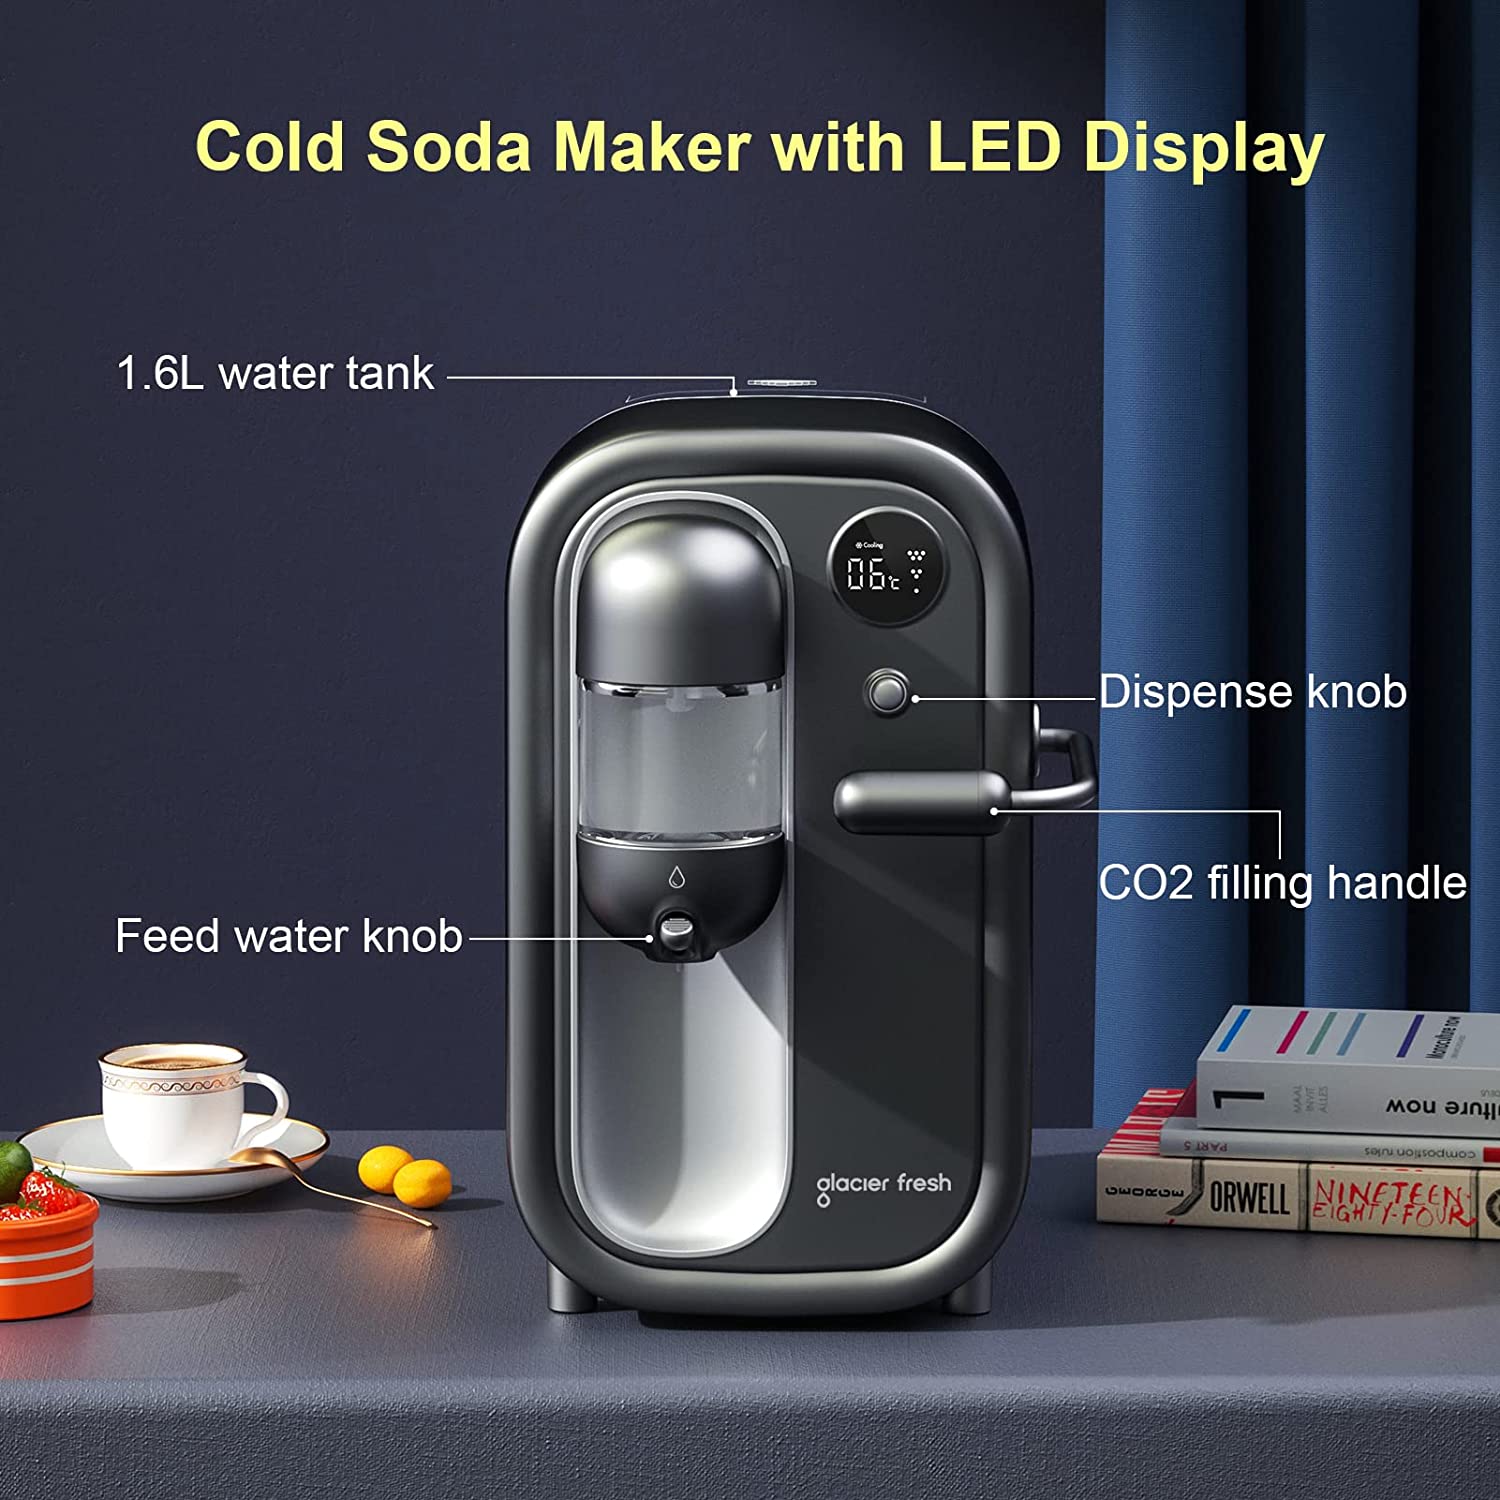 Carbonated Sparkling Water Machine Maker Made by Glacier Fresh